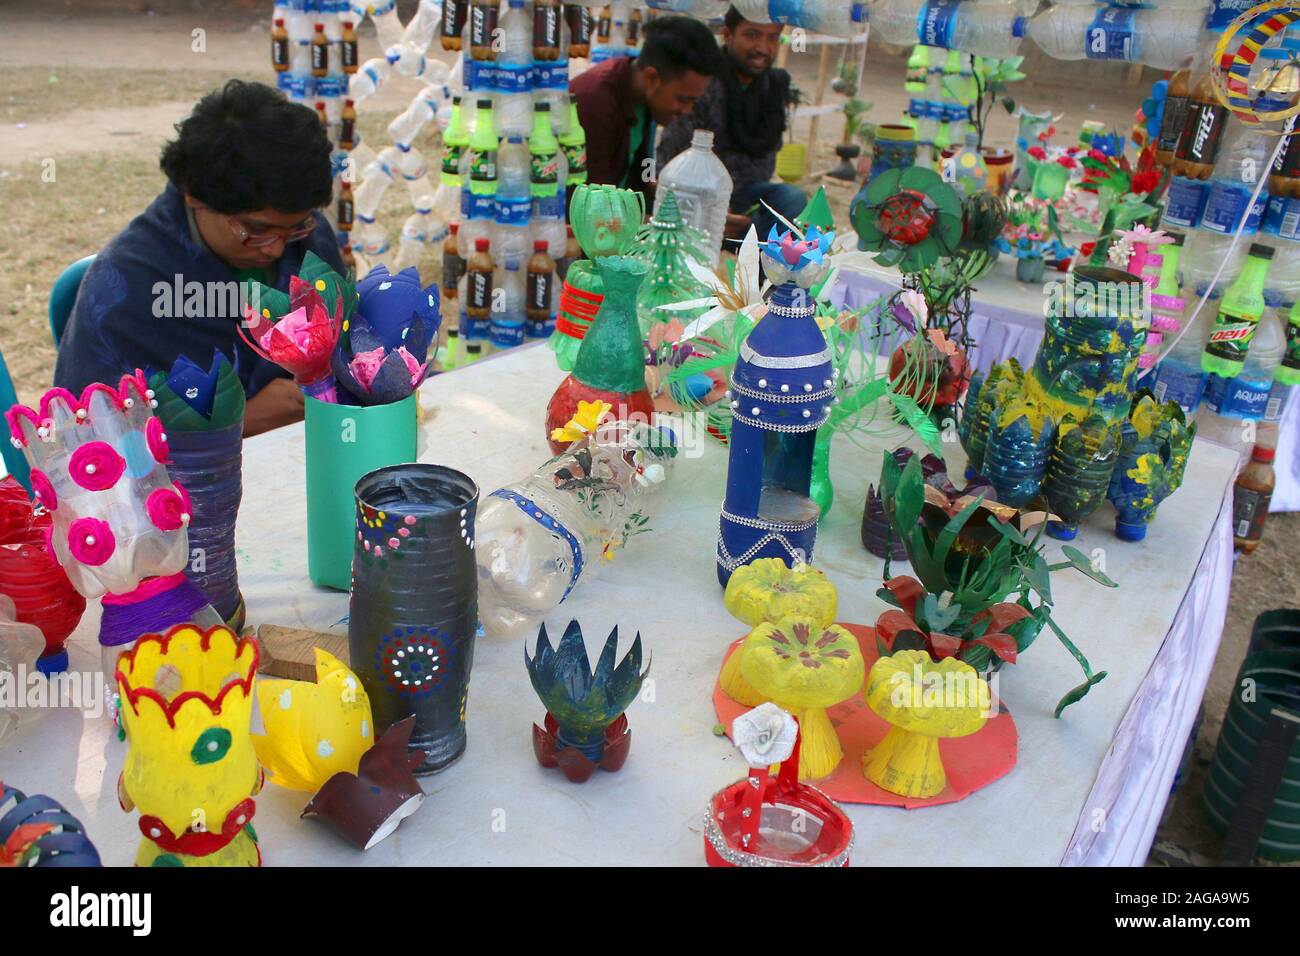 Several objects made out of empty plastic bottles collected by the BD Clean members are displayed at the exhibition.BD Clean members collected 3 million empty plastic bottles from various parts of Bangladesh as a homage to the three million martyrs who sacrificed their lives in the Liberation War of 1971. Artistes crafted various objects, including a mural of Bangabandhu, boats and the map of Bangladesh, using the scraps. The works were put on display at Mohakhali's T&T Colony playground in Dhaka on the eve of Victory Day. Stock Photo